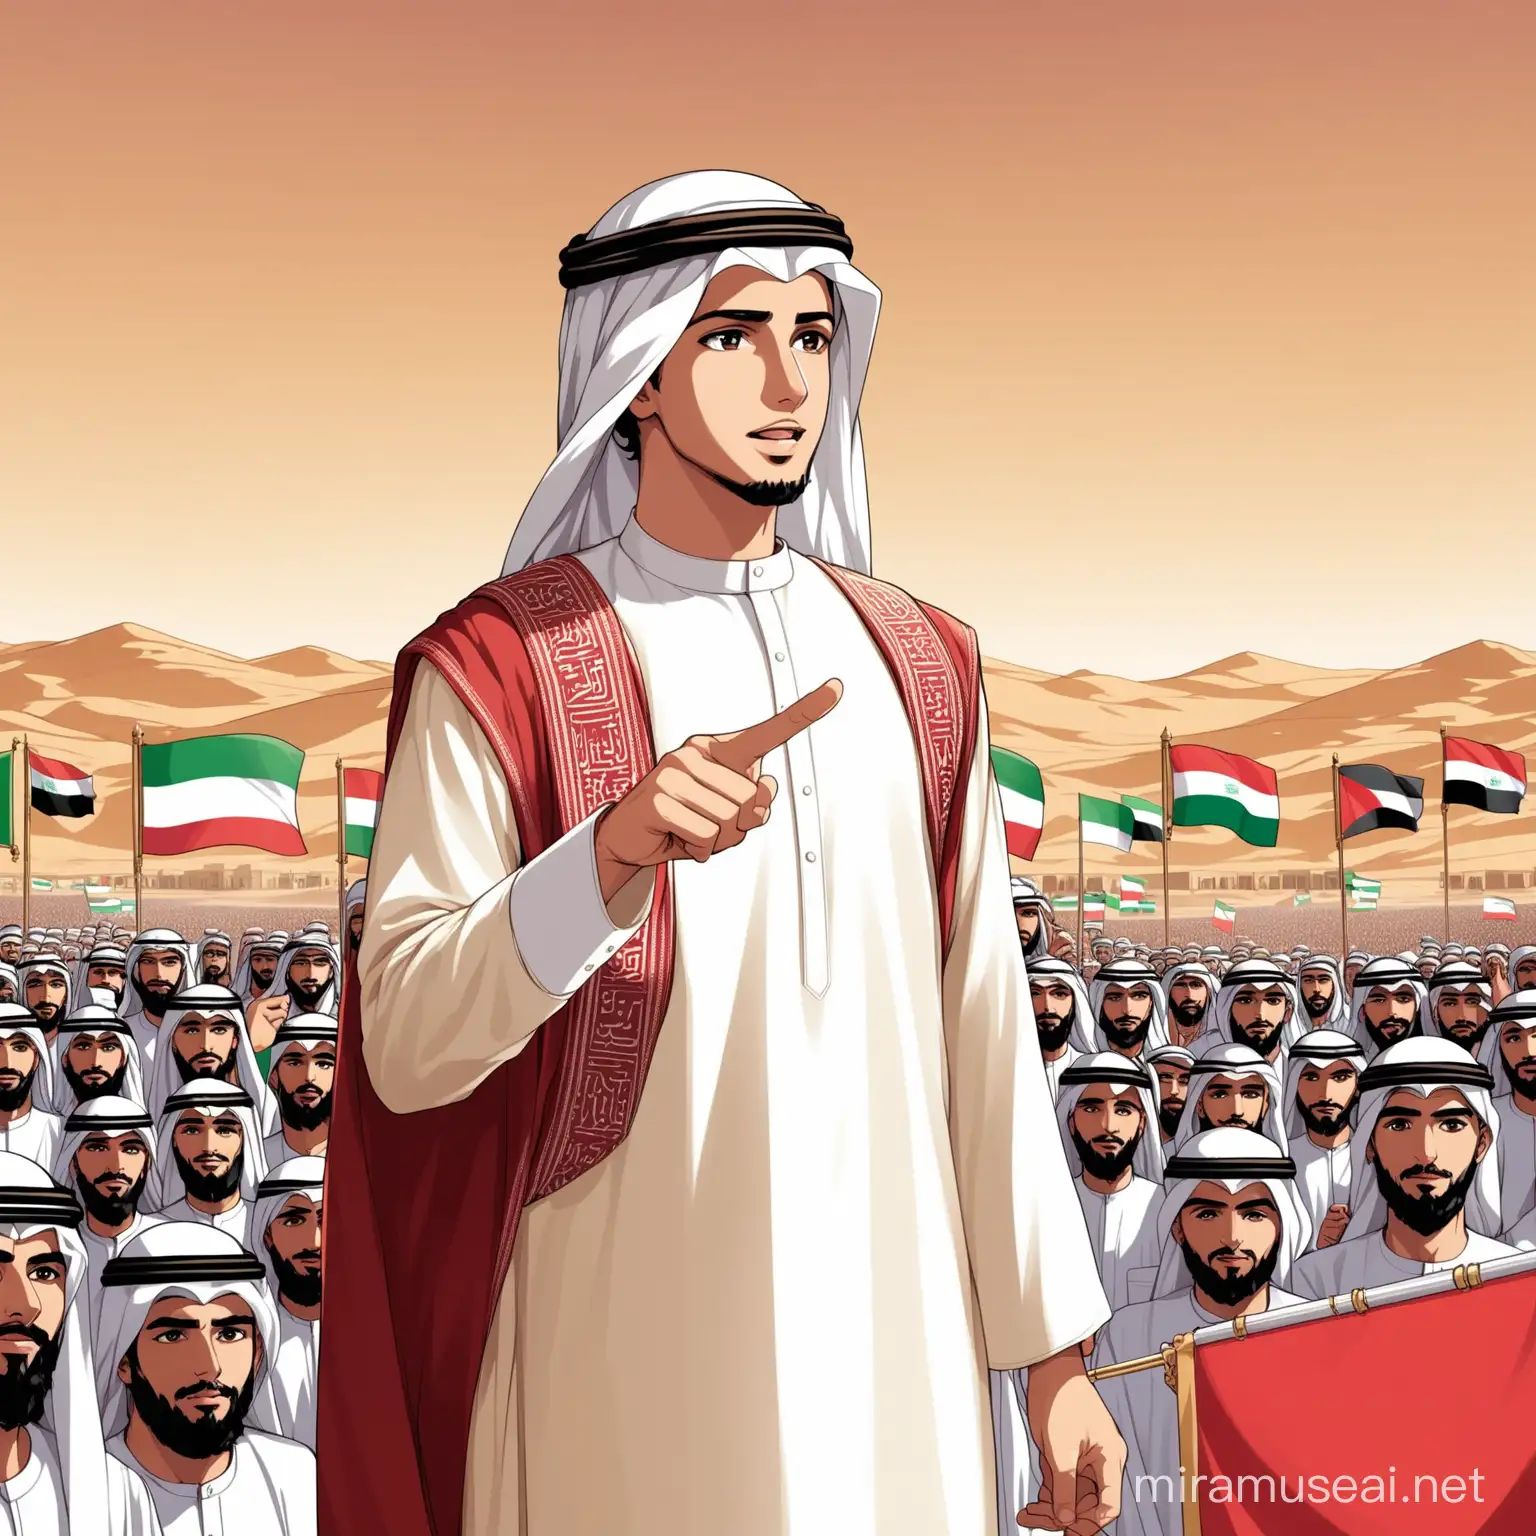 Arab Leader Delivering Speech in Desert with Flags